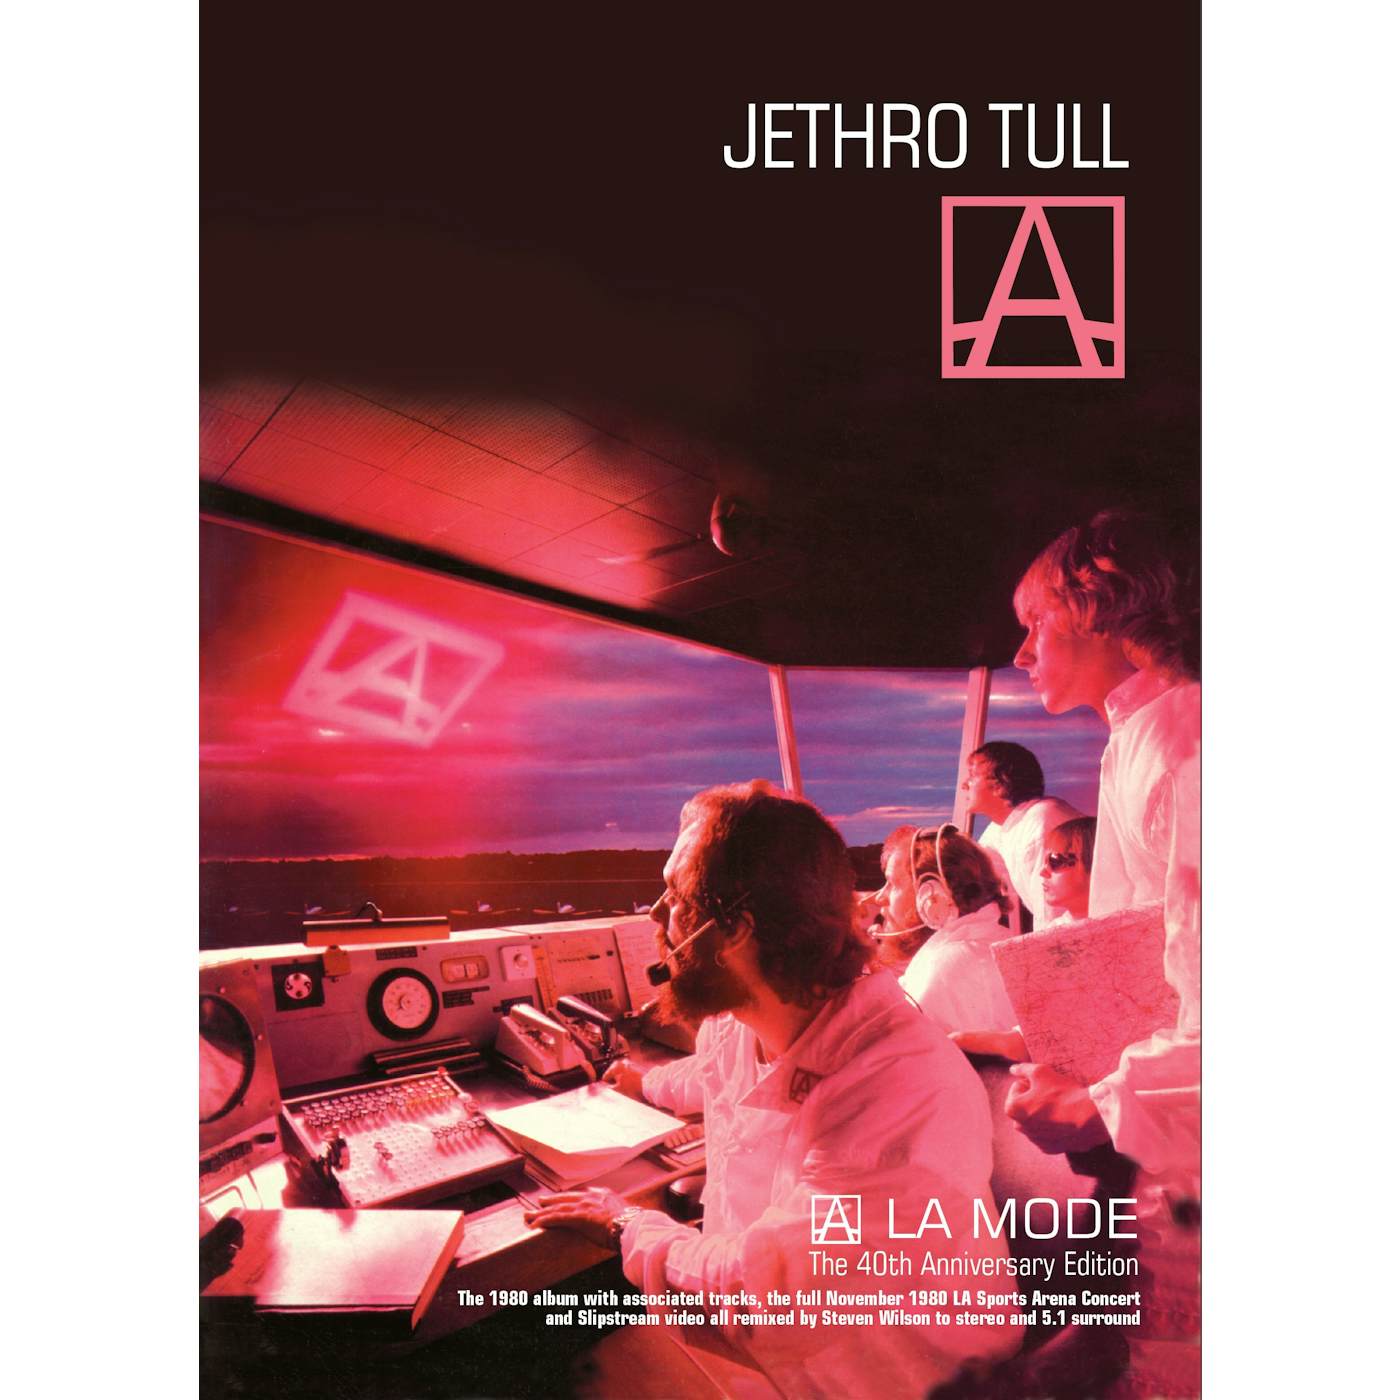 Jethro Tull A (The 40th Anniversary Edition) 3CD/3DVD